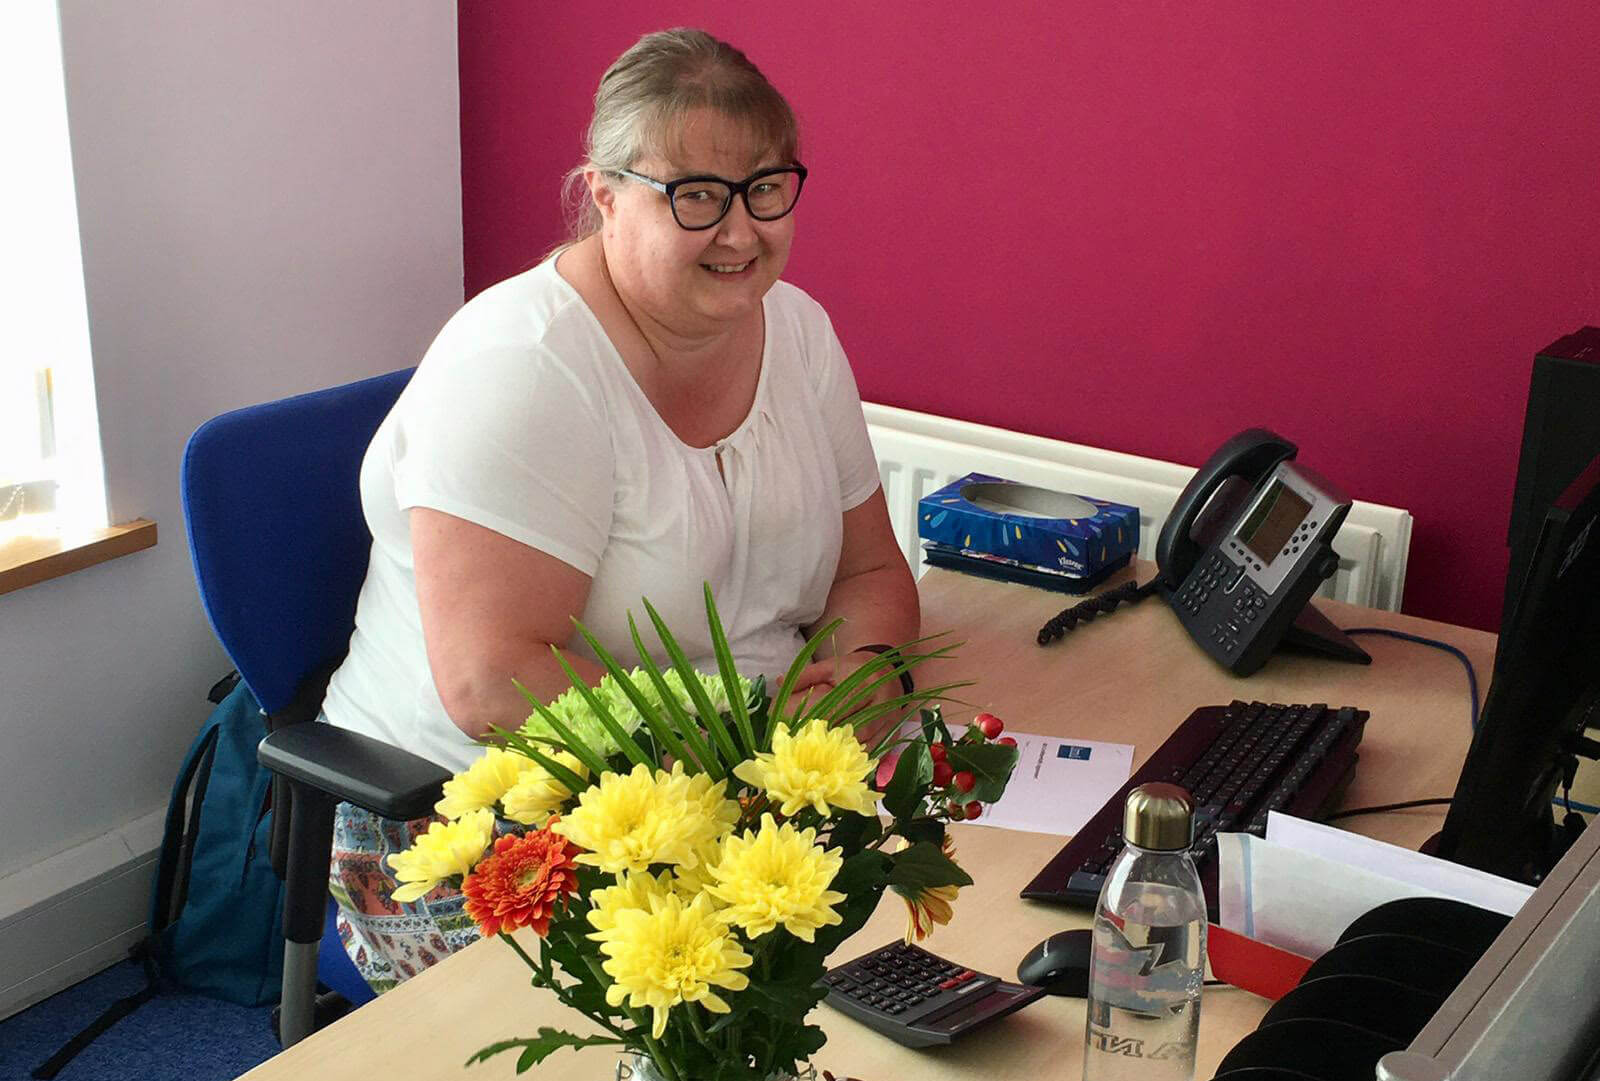 LMI are thrilled to introduce the newest member of the LMI team, our new Finance Manager, Carole Townley.